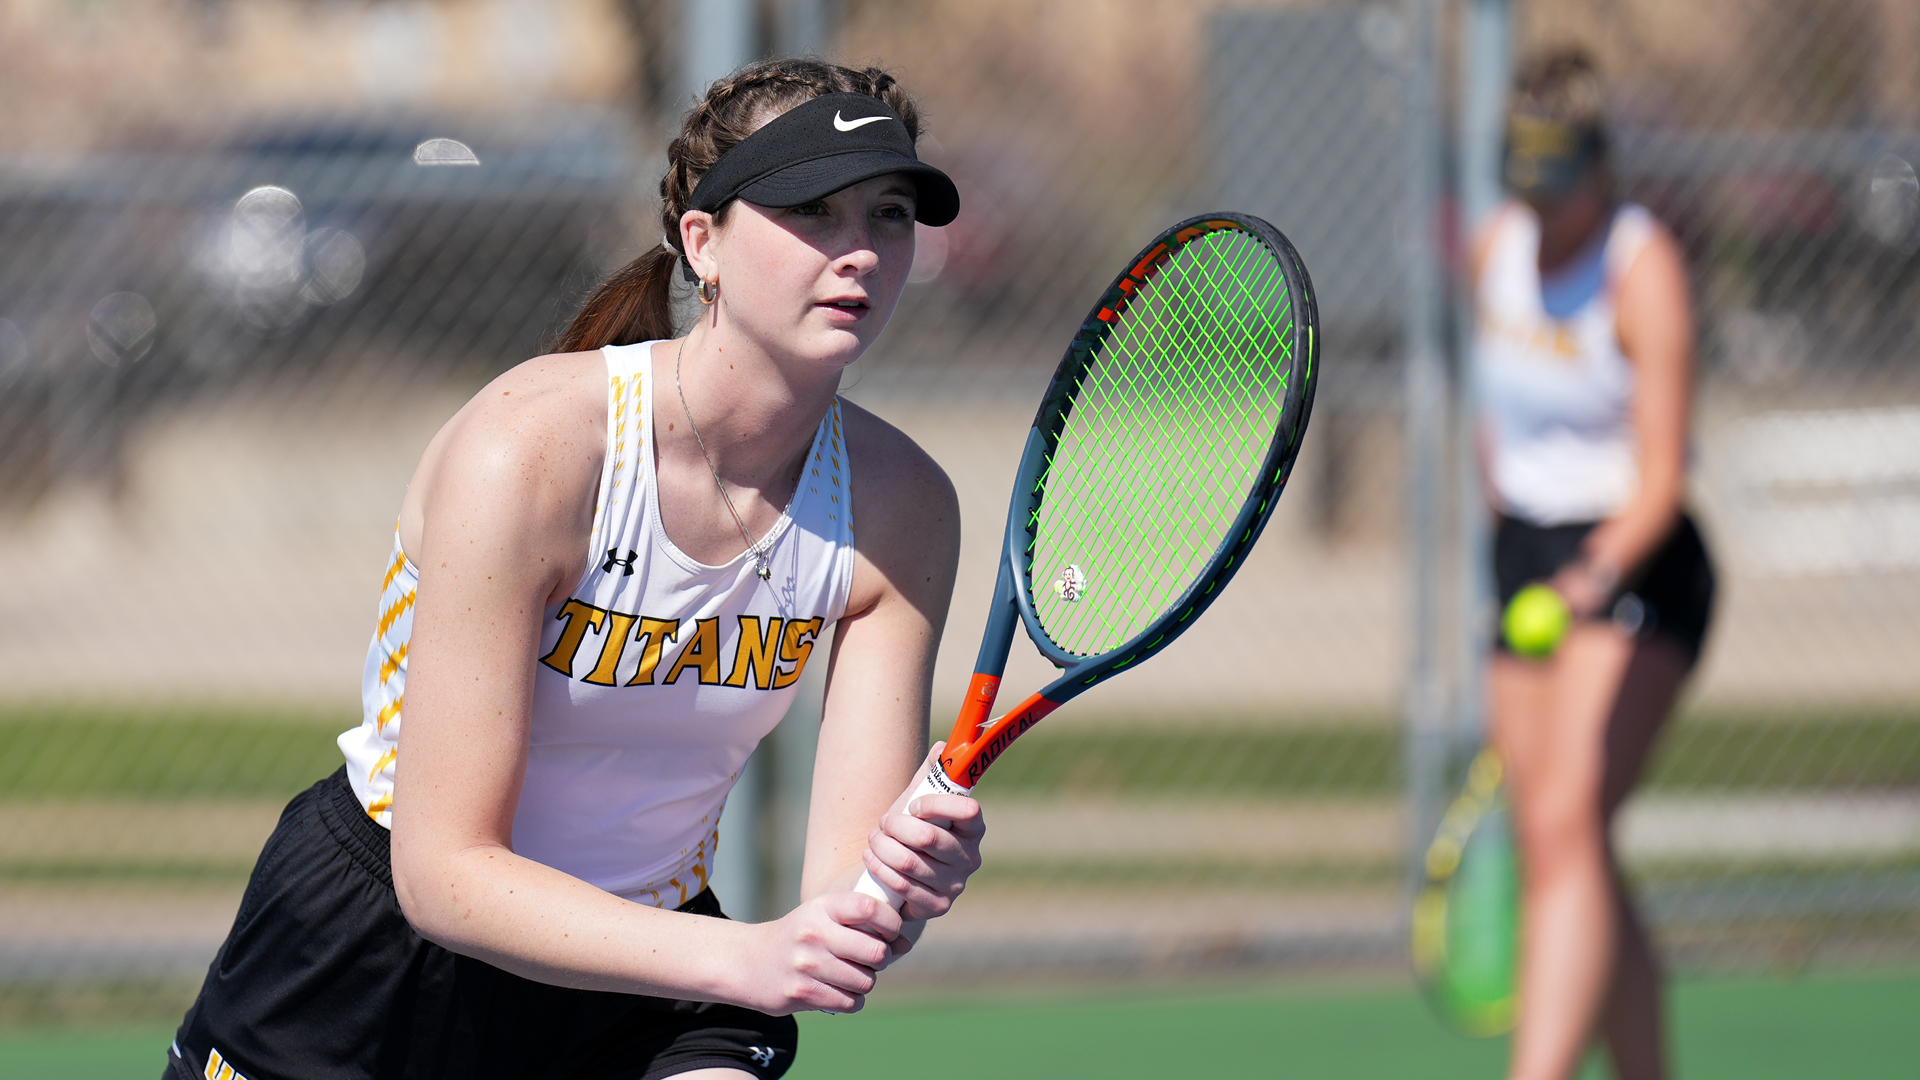 Kayla Gibbs (pictured) and No. 3 doubles partner Jameson Gregory won an 8-6 decision over their Viking opponents on Saturday. Photo Credit: Terri Cole, UW-Oshkosh Sports Information